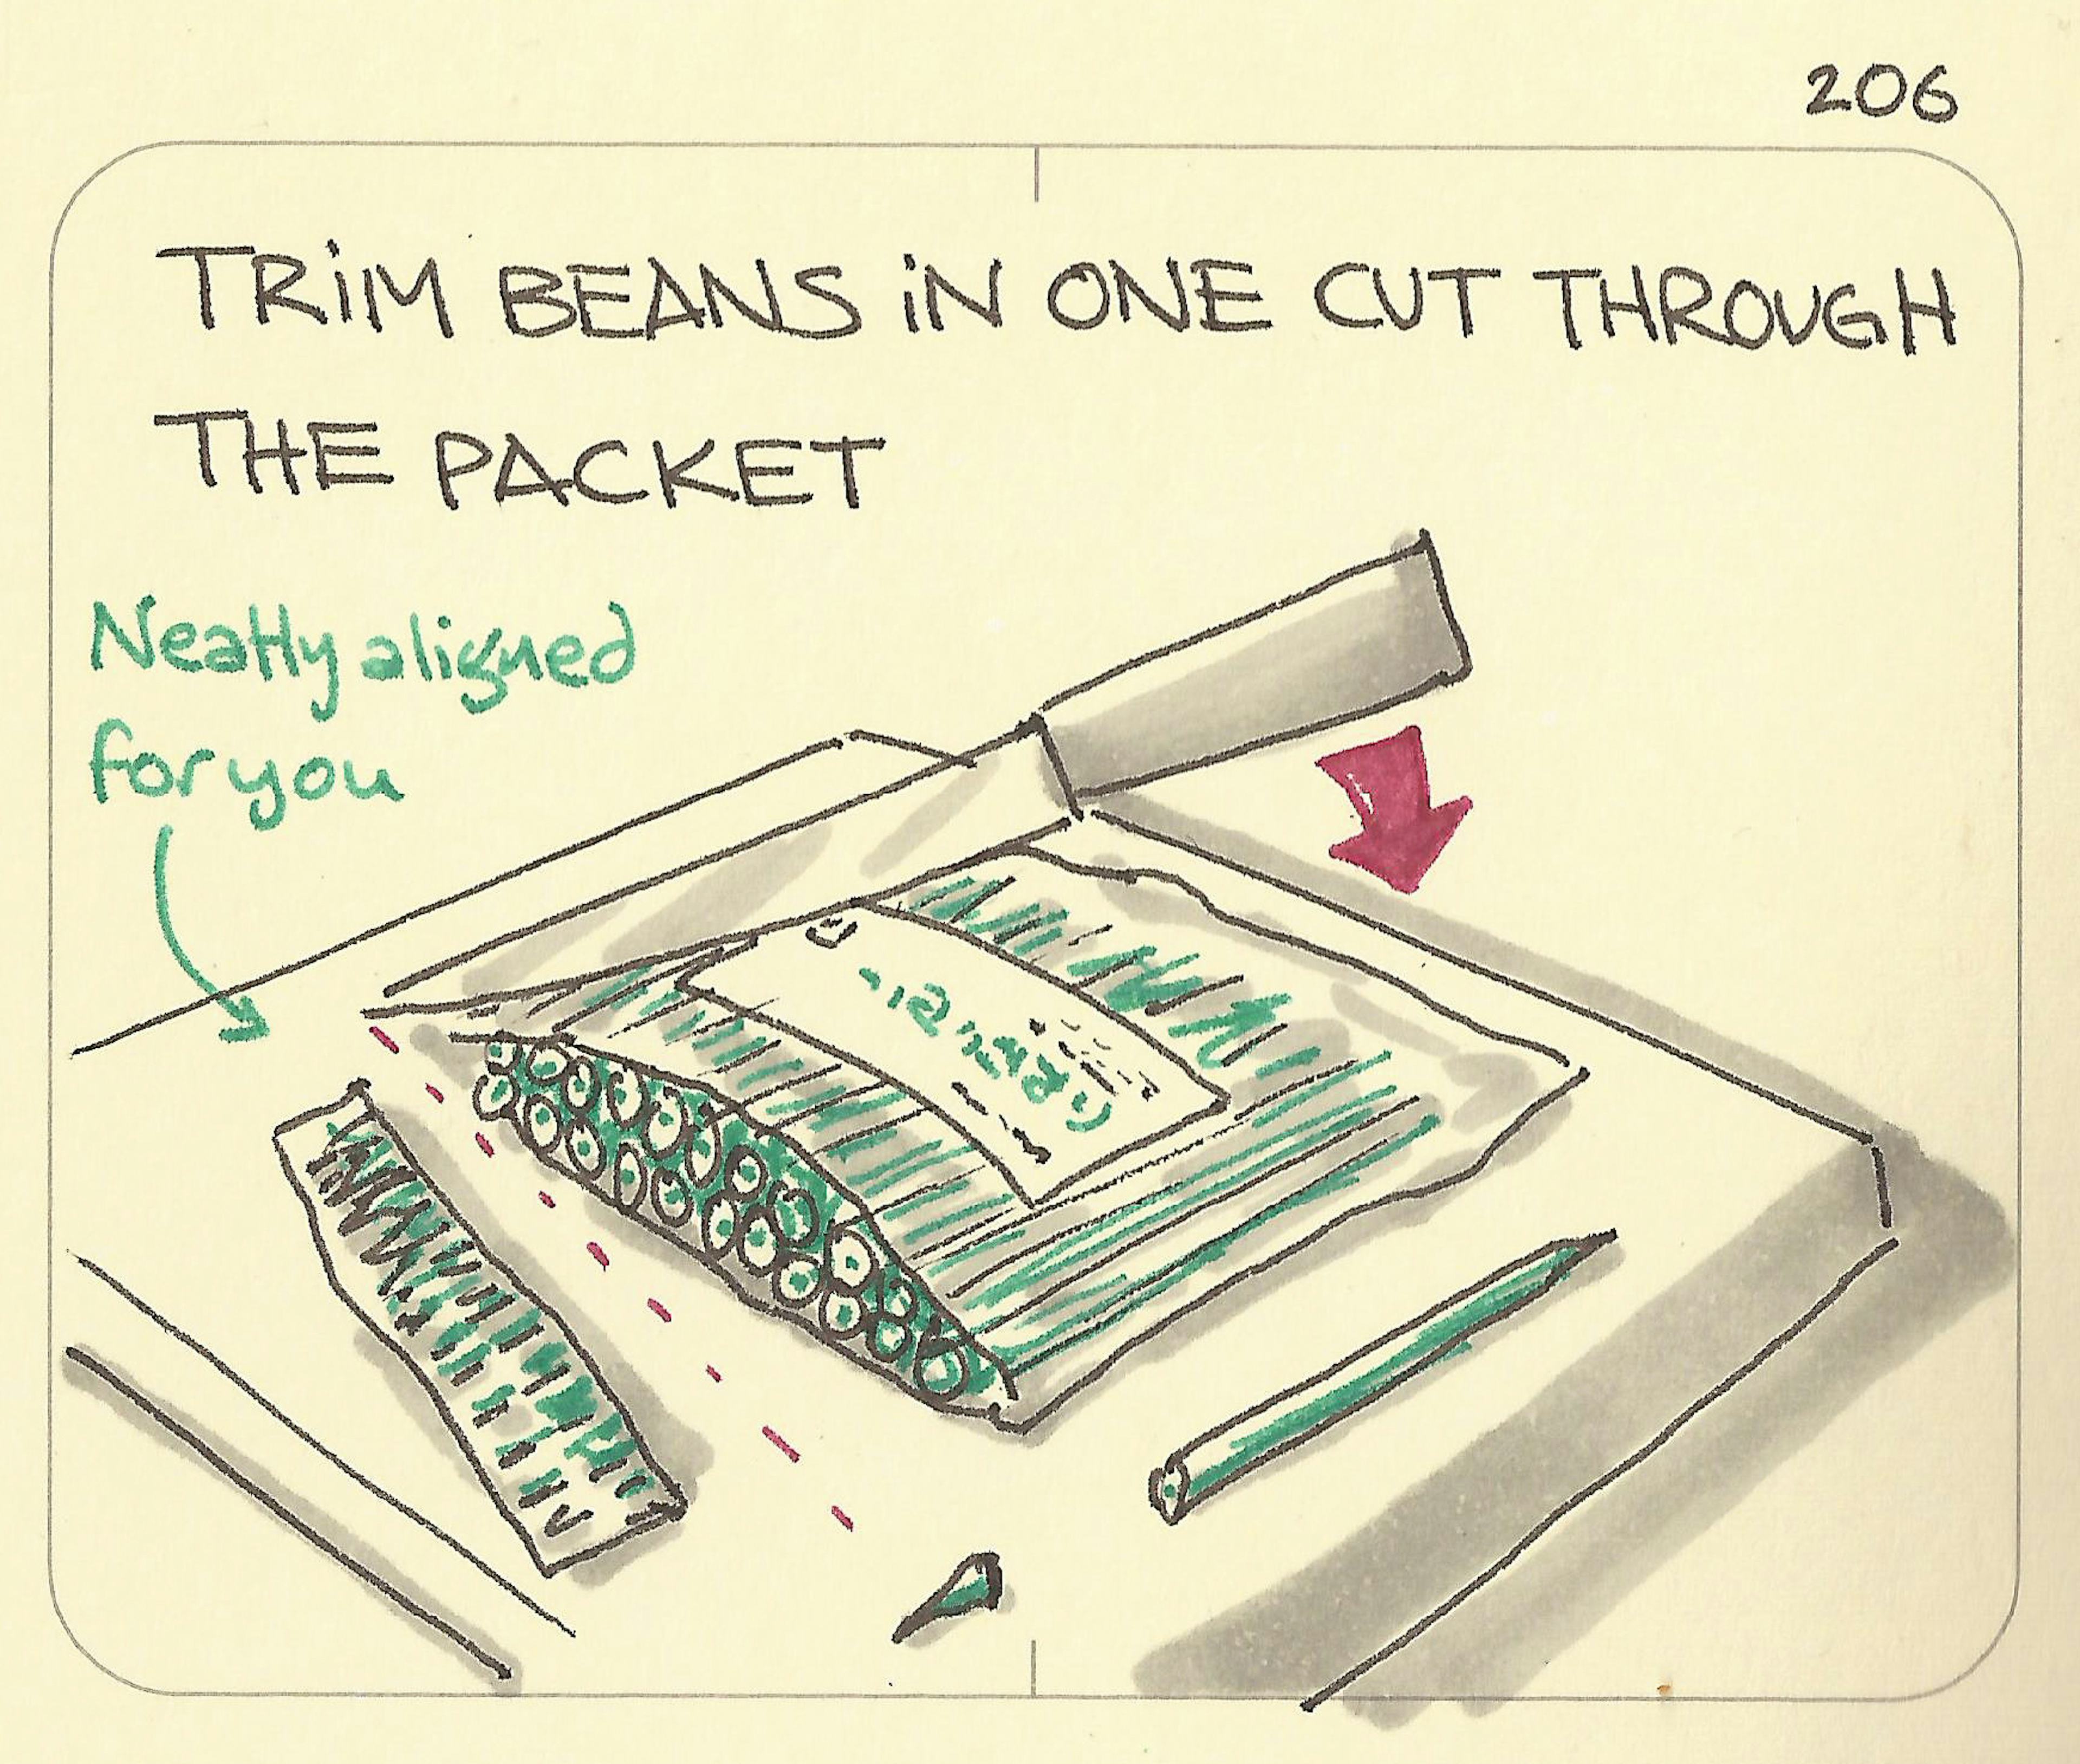 Trim beans in one cut through the packet - Sketchplanations